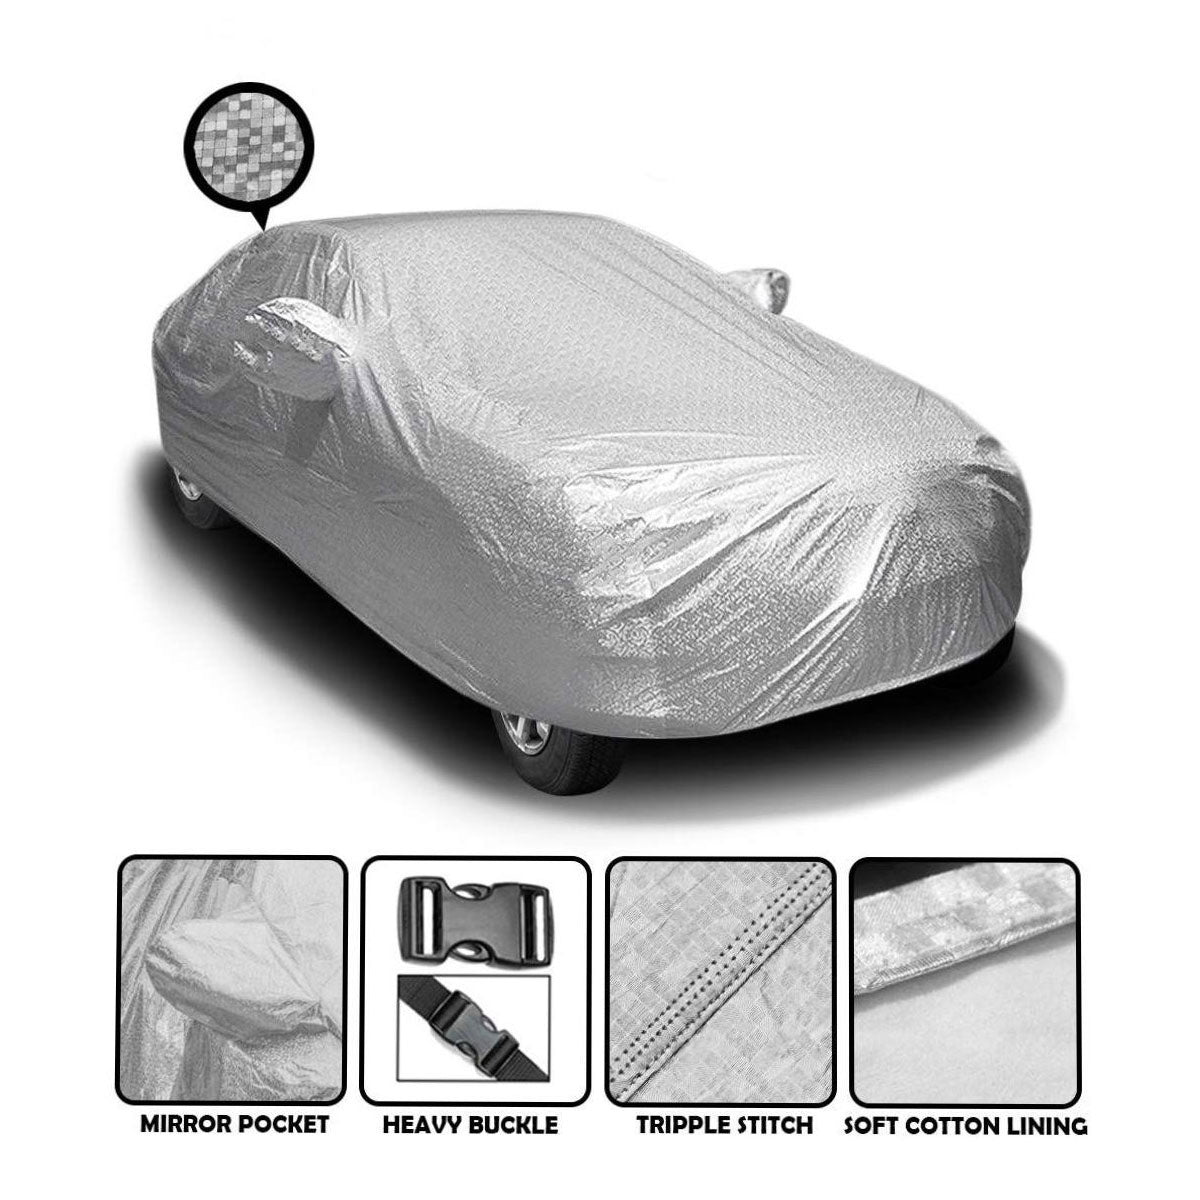 Oshotto Spyro Silver Anti Reflective, dustProof Silver and Water Proof Silver Car Body Cover with Mirror Pockets For Chevrolet Captiva